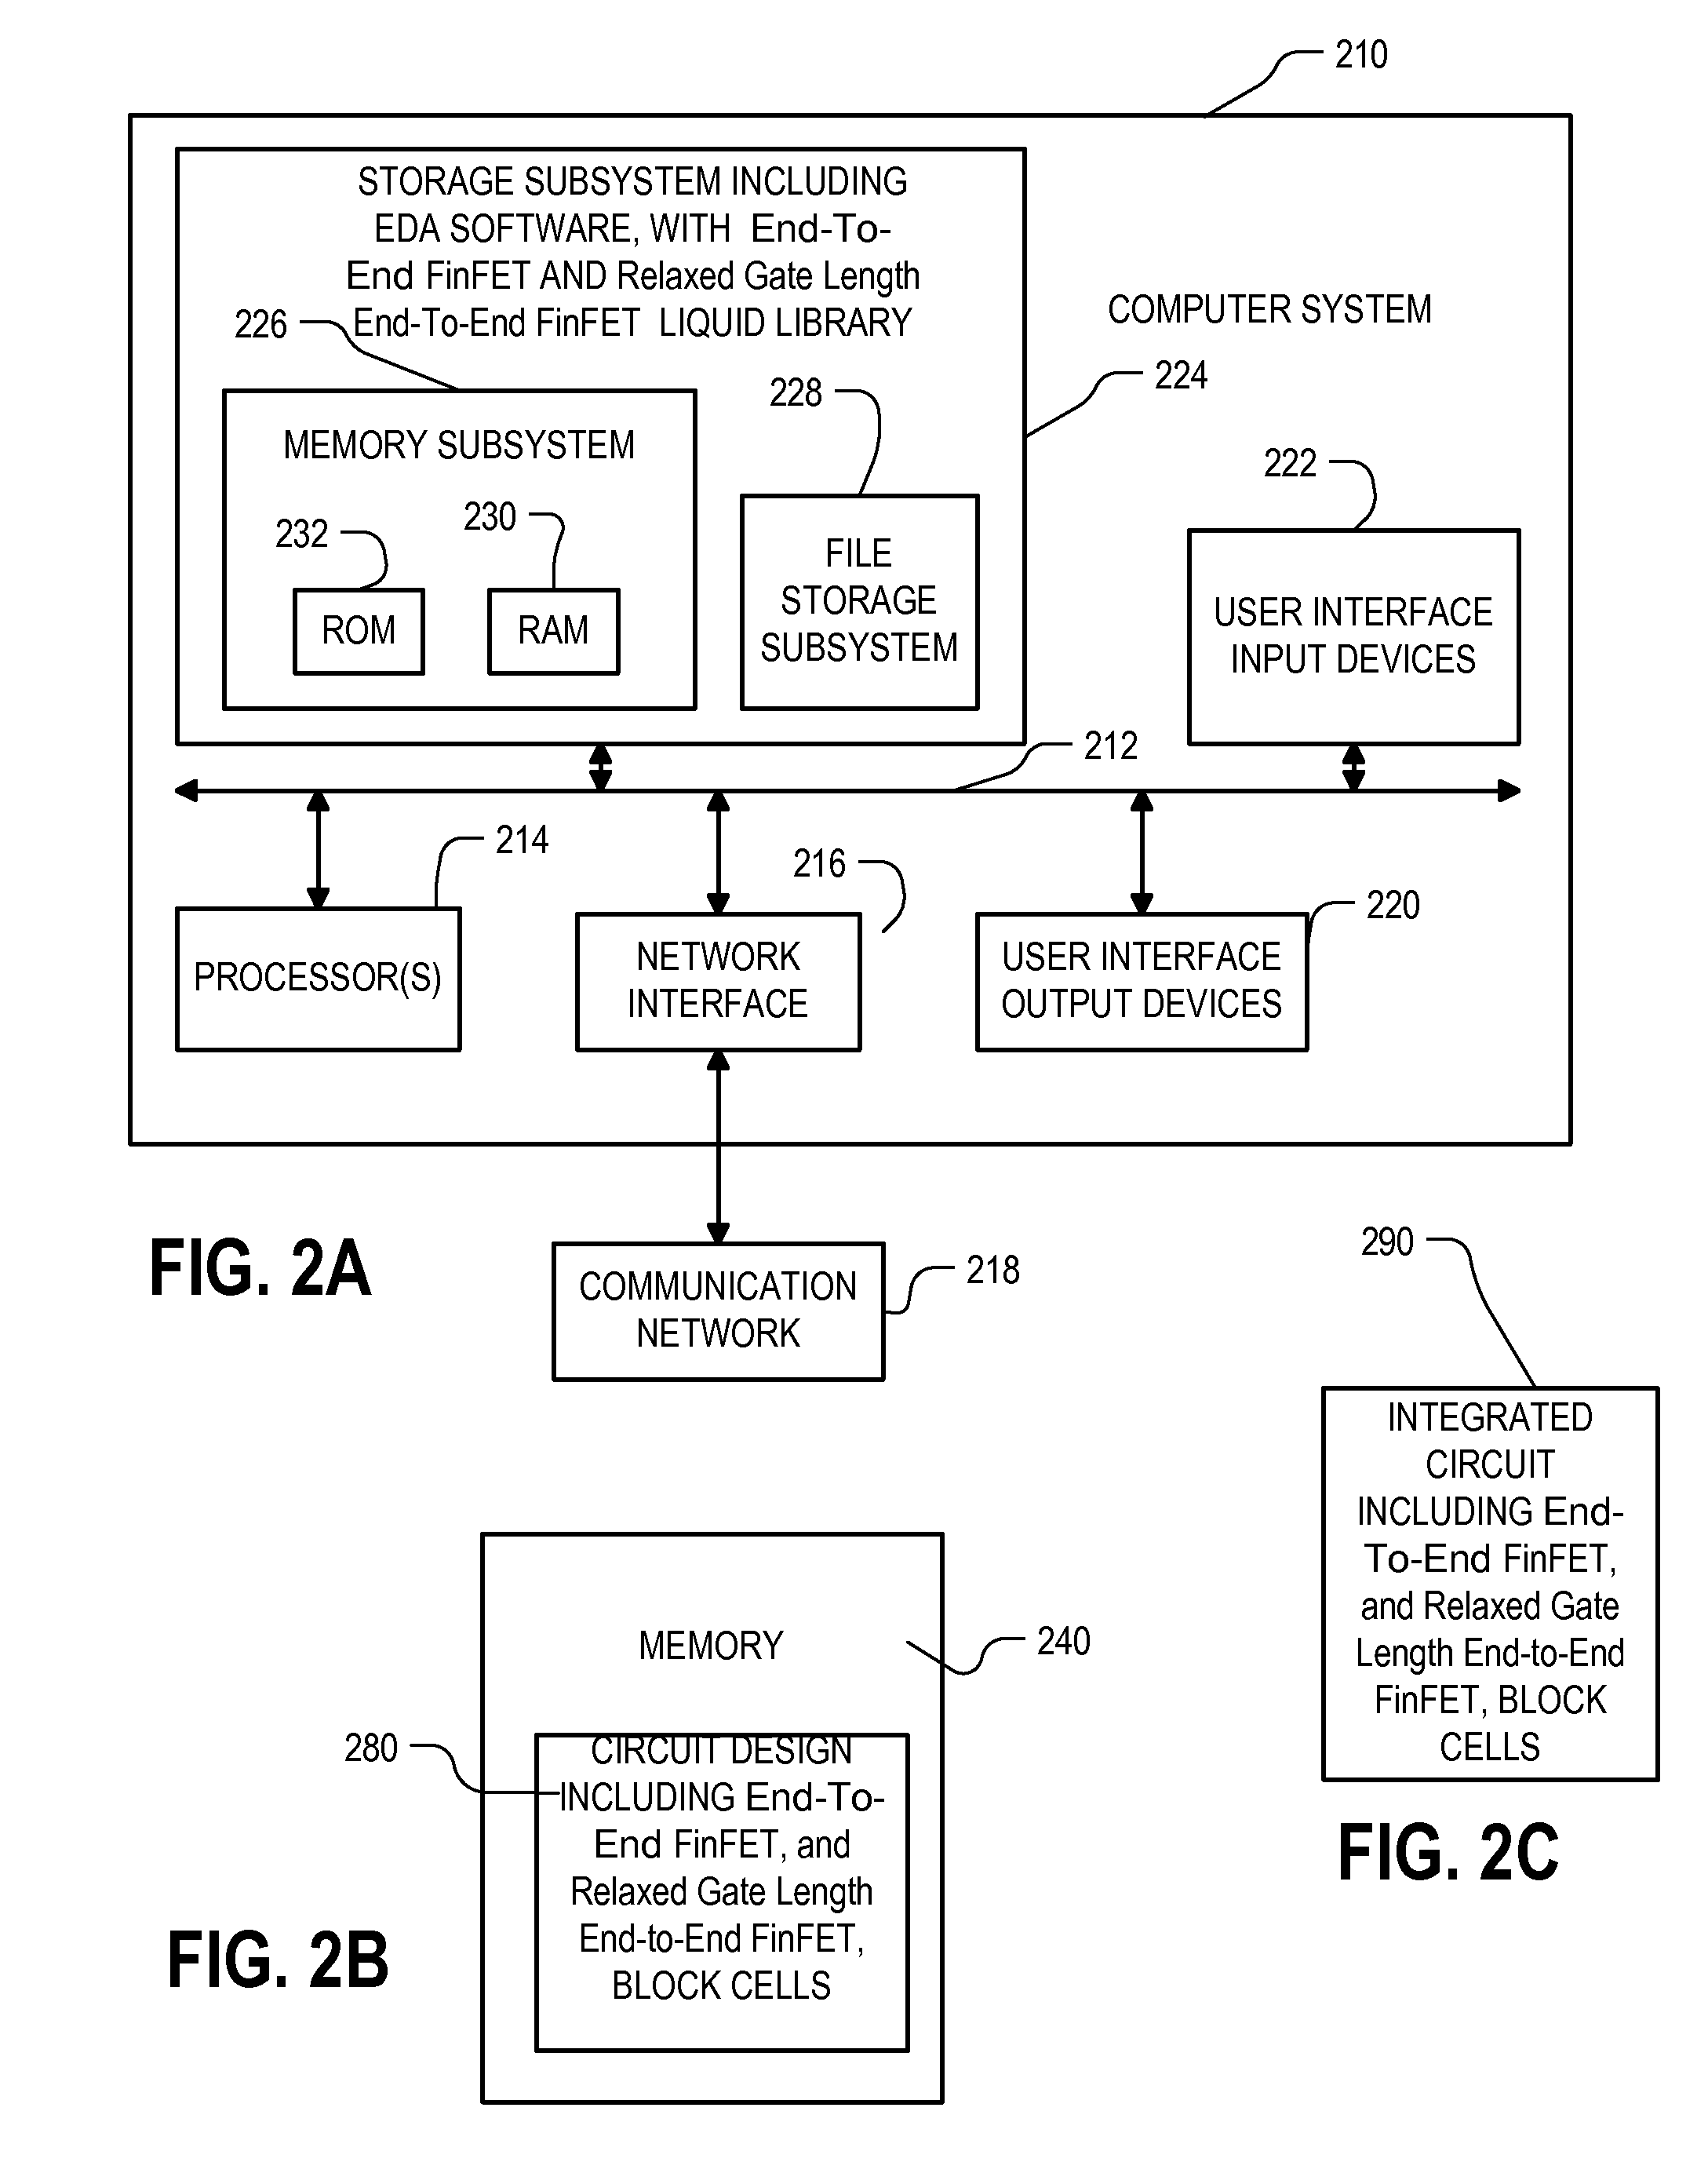 N-channel and p-channel end-to-end finfet cell architecture with relaxed gate pitch